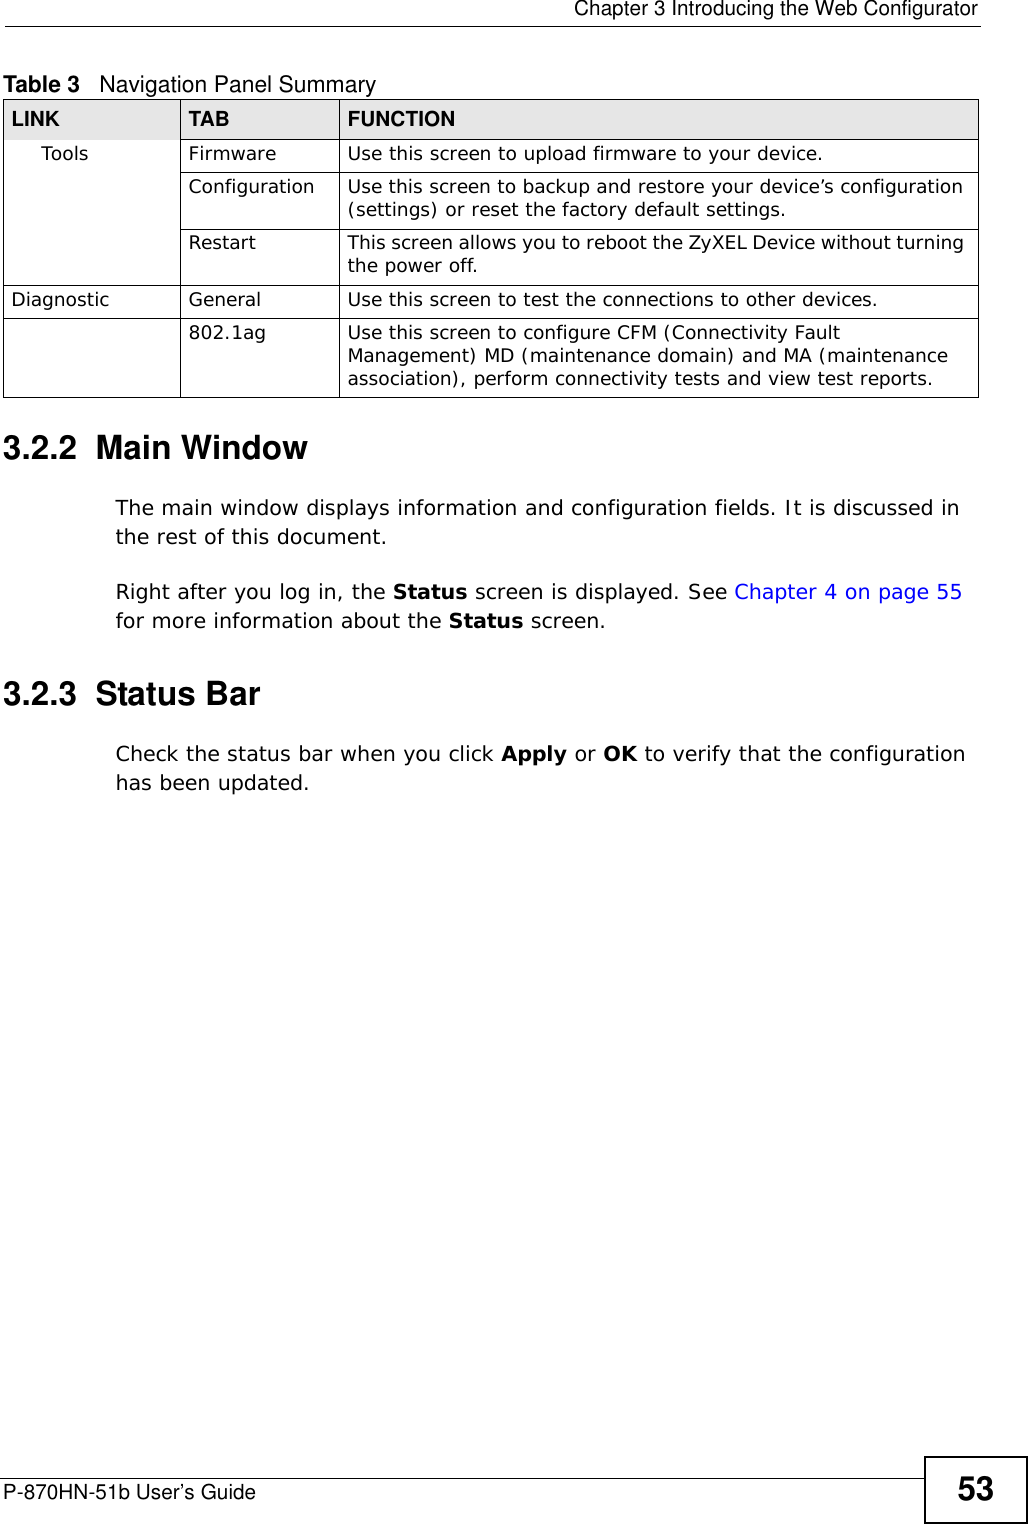  Chapter 3 Introducing the Web ConfiguratorP-870HN-51b User’s Guide 533.2.2  Main WindowThe main window displays information and configuration fields. It is discussed in the rest of this document.Right after you log in, the Status screen is displayed. See Chapter 4 on page 55 for more information about the Status screen.3.2.3  Status BarCheck the status bar when you click Apply or OK to verify that the configuration has been updated.Tools Firmware Use this screen to upload firmware to your device.Configuration Use this screen to backup and restore your device’s configuration (settings) or reset the factory default settings.Restart This screen allows you to reboot the ZyXEL Device without turning the power off.Diagnostic General Use this screen to test the connections to other devices.802.1ag Use this screen to configure CFM (Connectivity Fault Management) MD (maintenance domain) and MA (maintenance association), perform connectivity tests and view test reports.Table 3   Navigation Panel SummaryLINK TAB FUNCTION